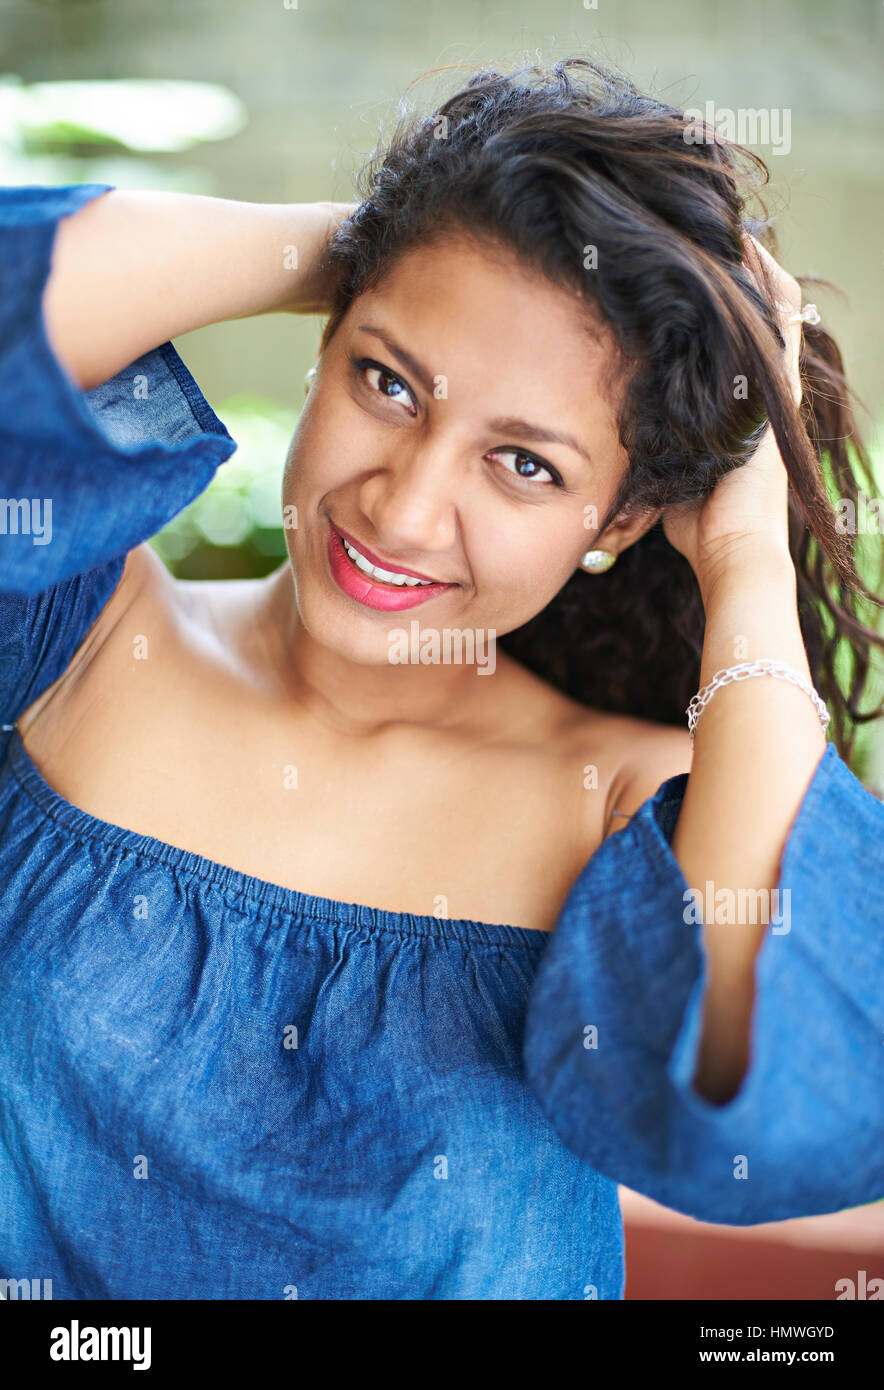 portrait of smiling woman outside in park Stock Photo